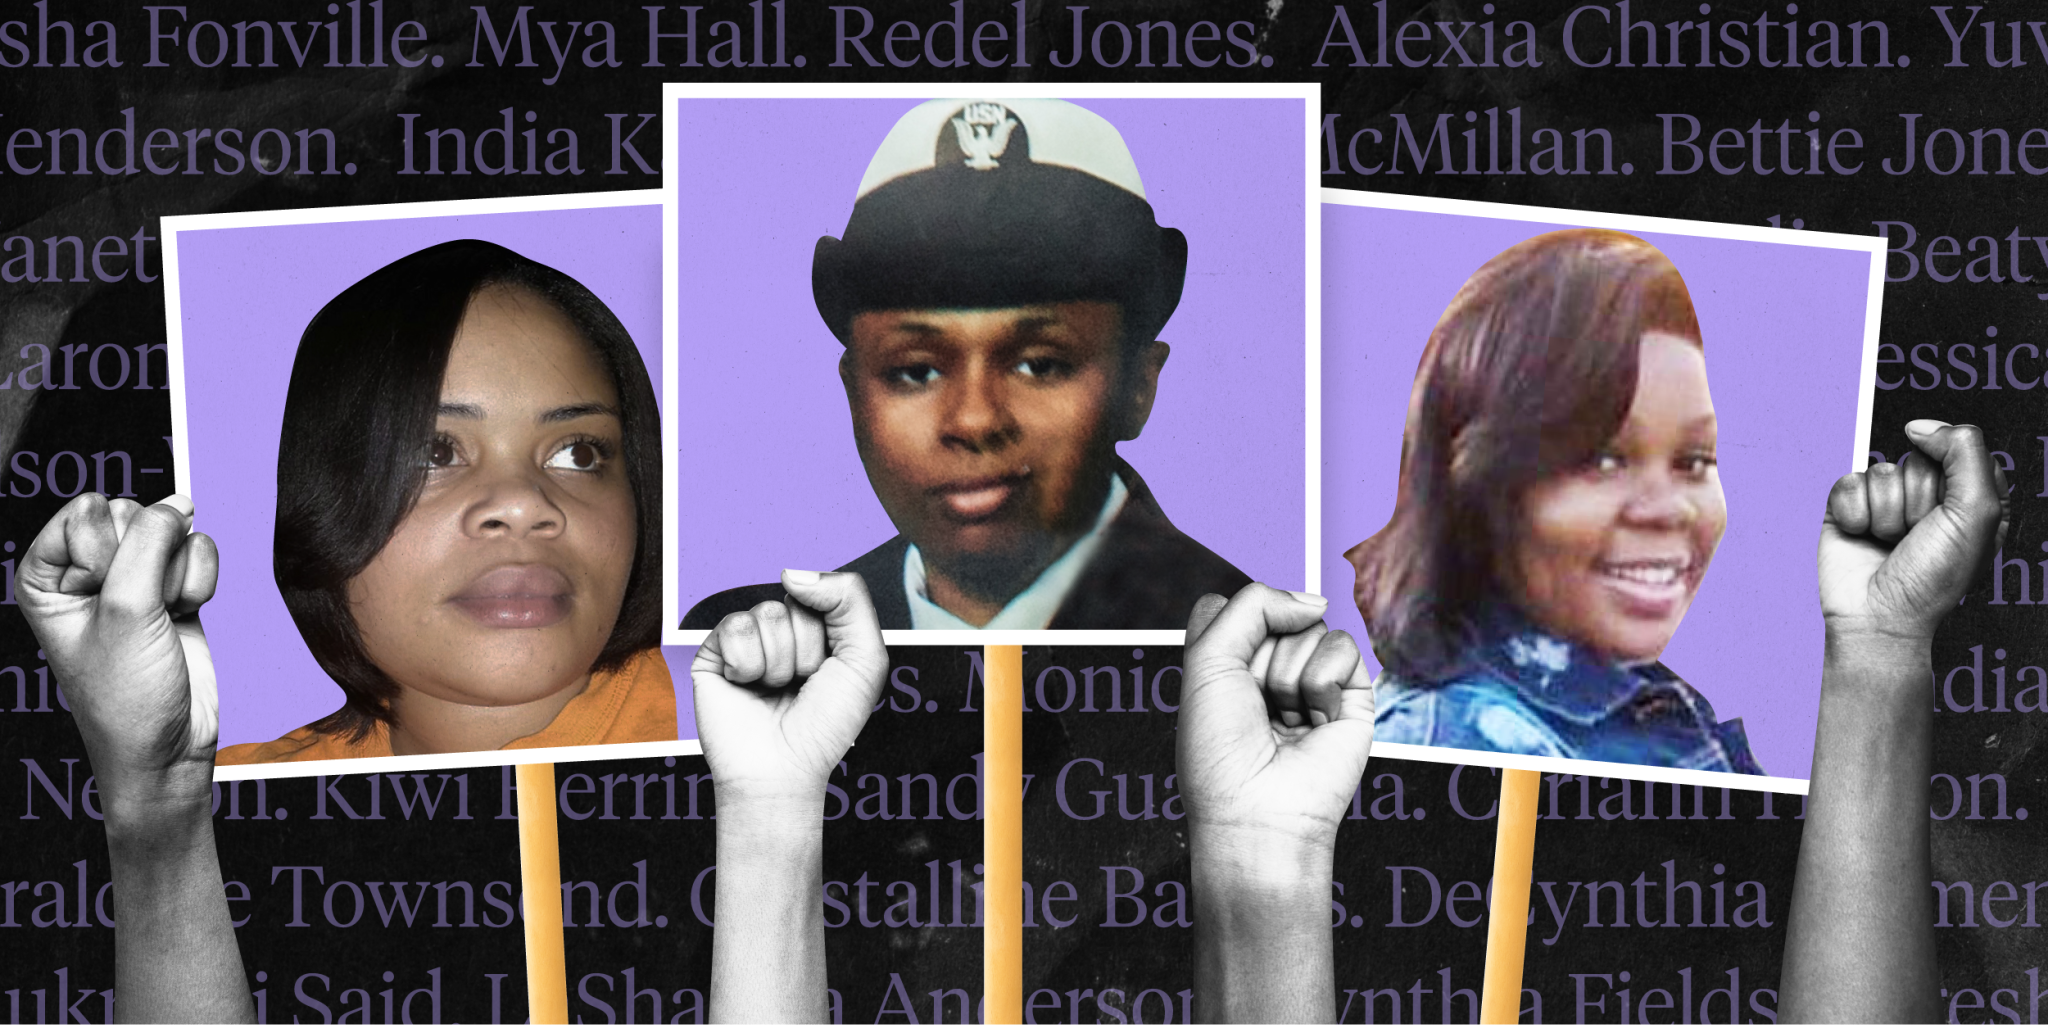 50 Black women have been killed by US police since 2015